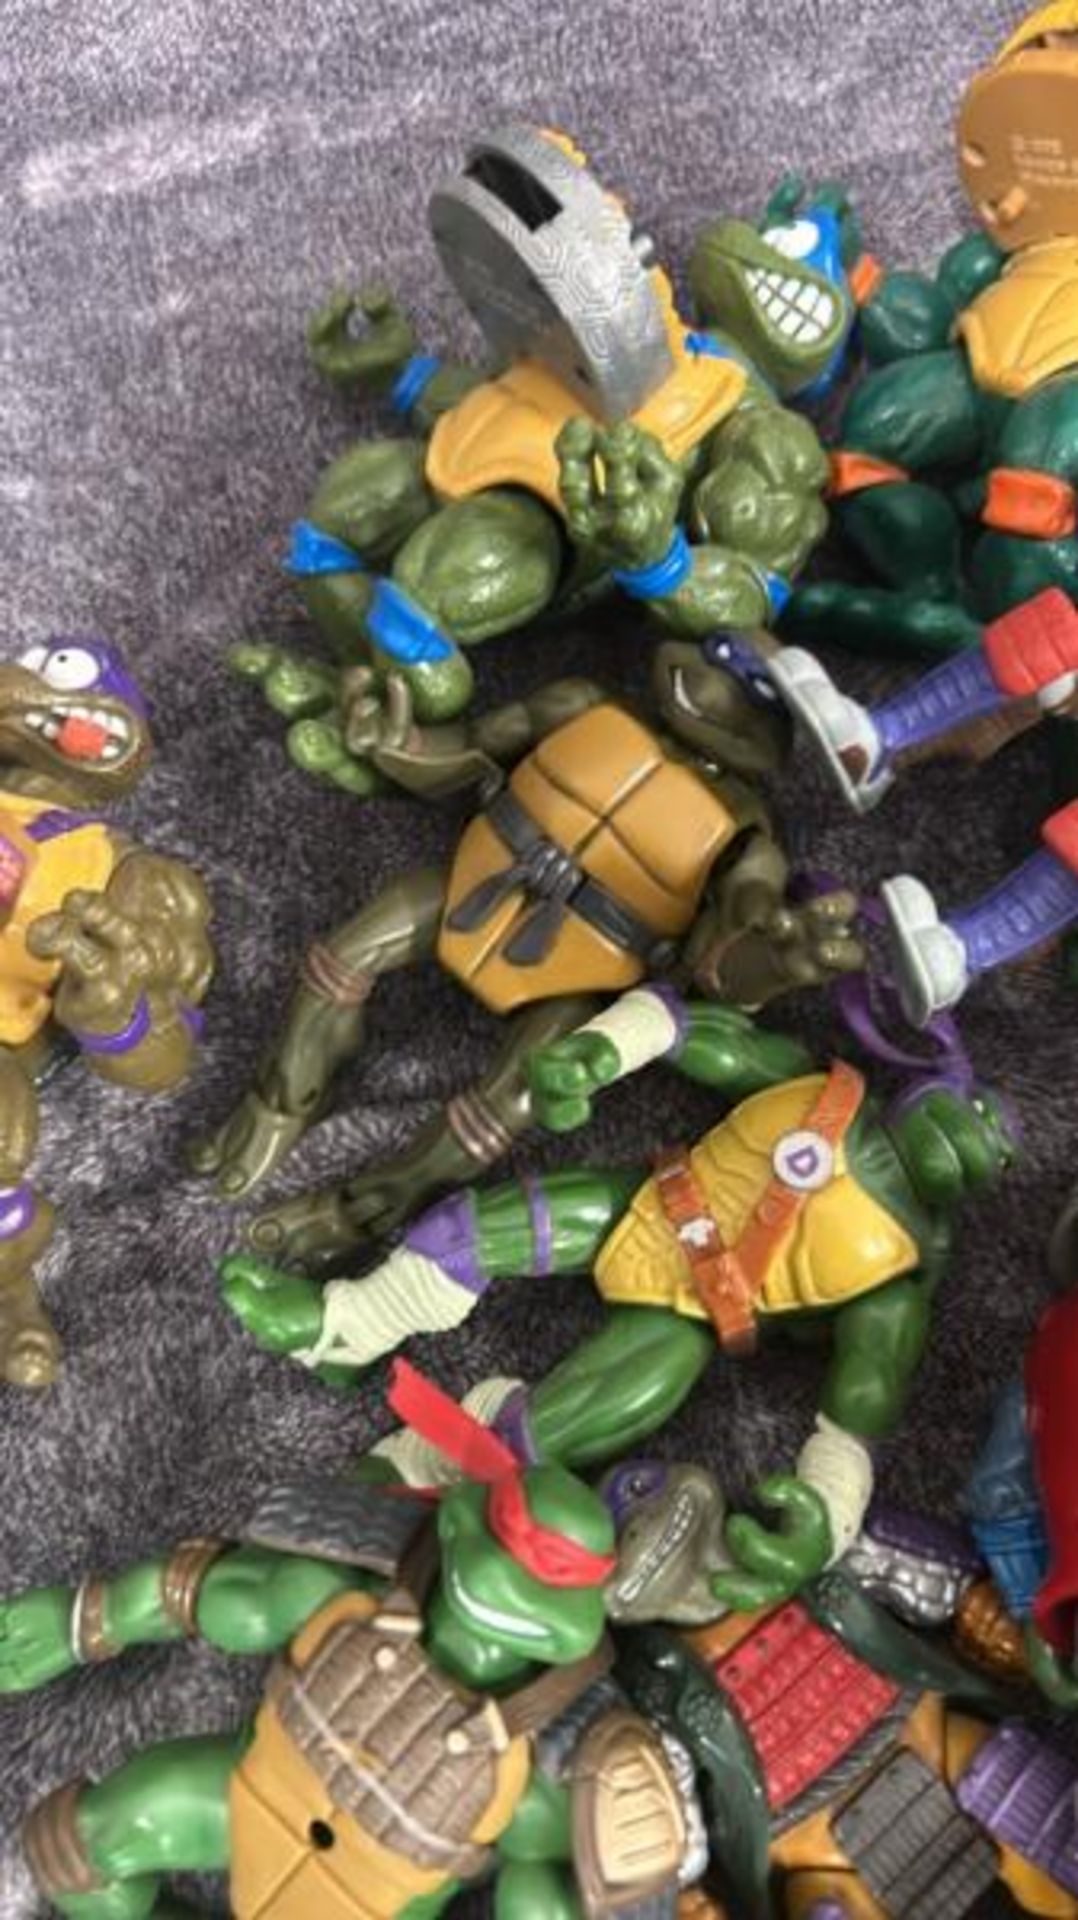 Teenage Mutant Ninja Turtles - Assorted loose figures including some based on the movie versions and - Image 8 of 13